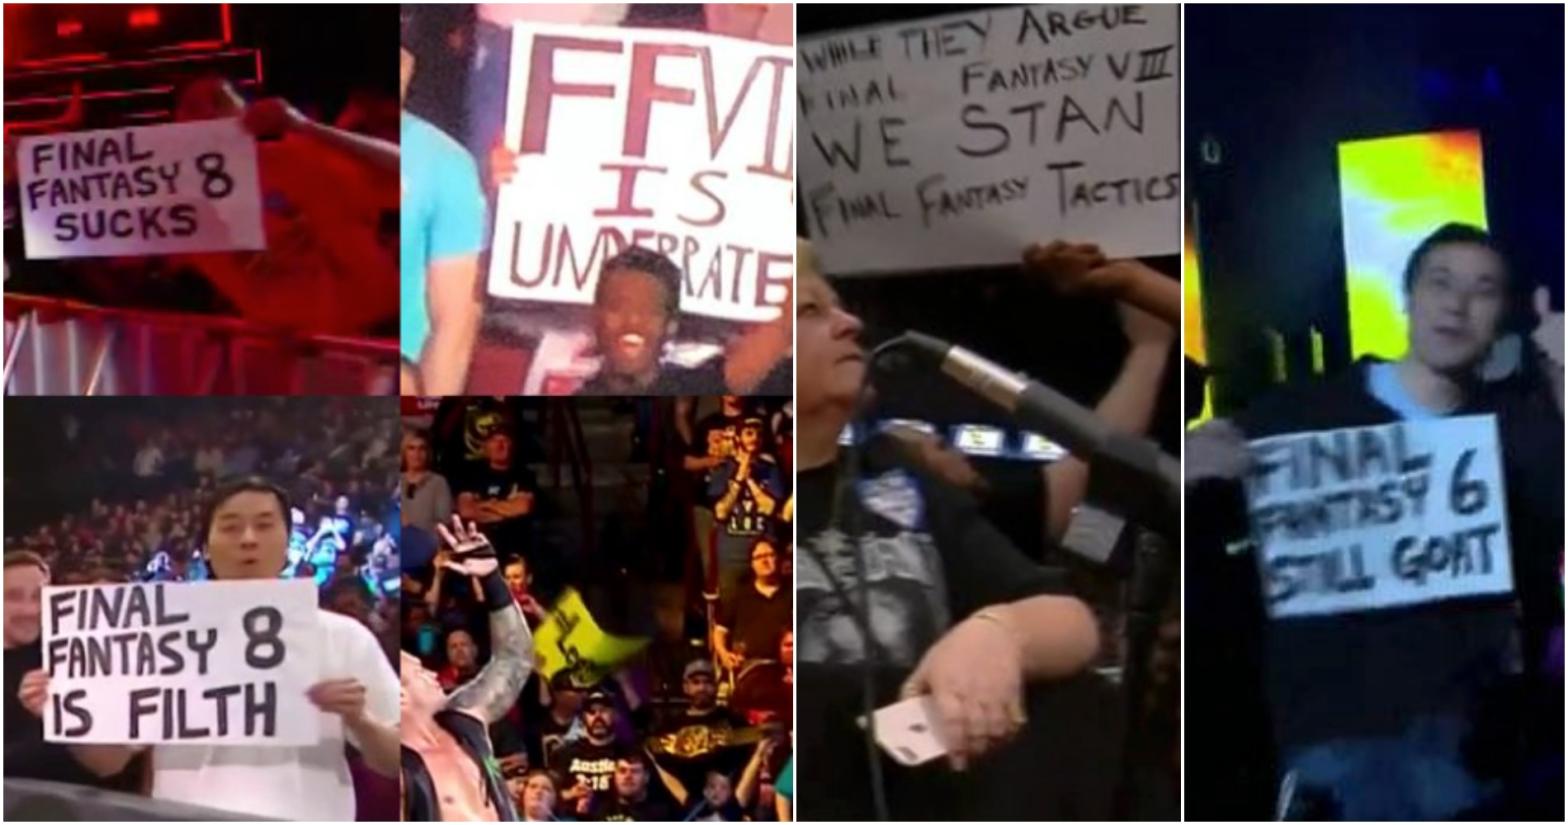 final fantasy fans wrestling posters wwe signs